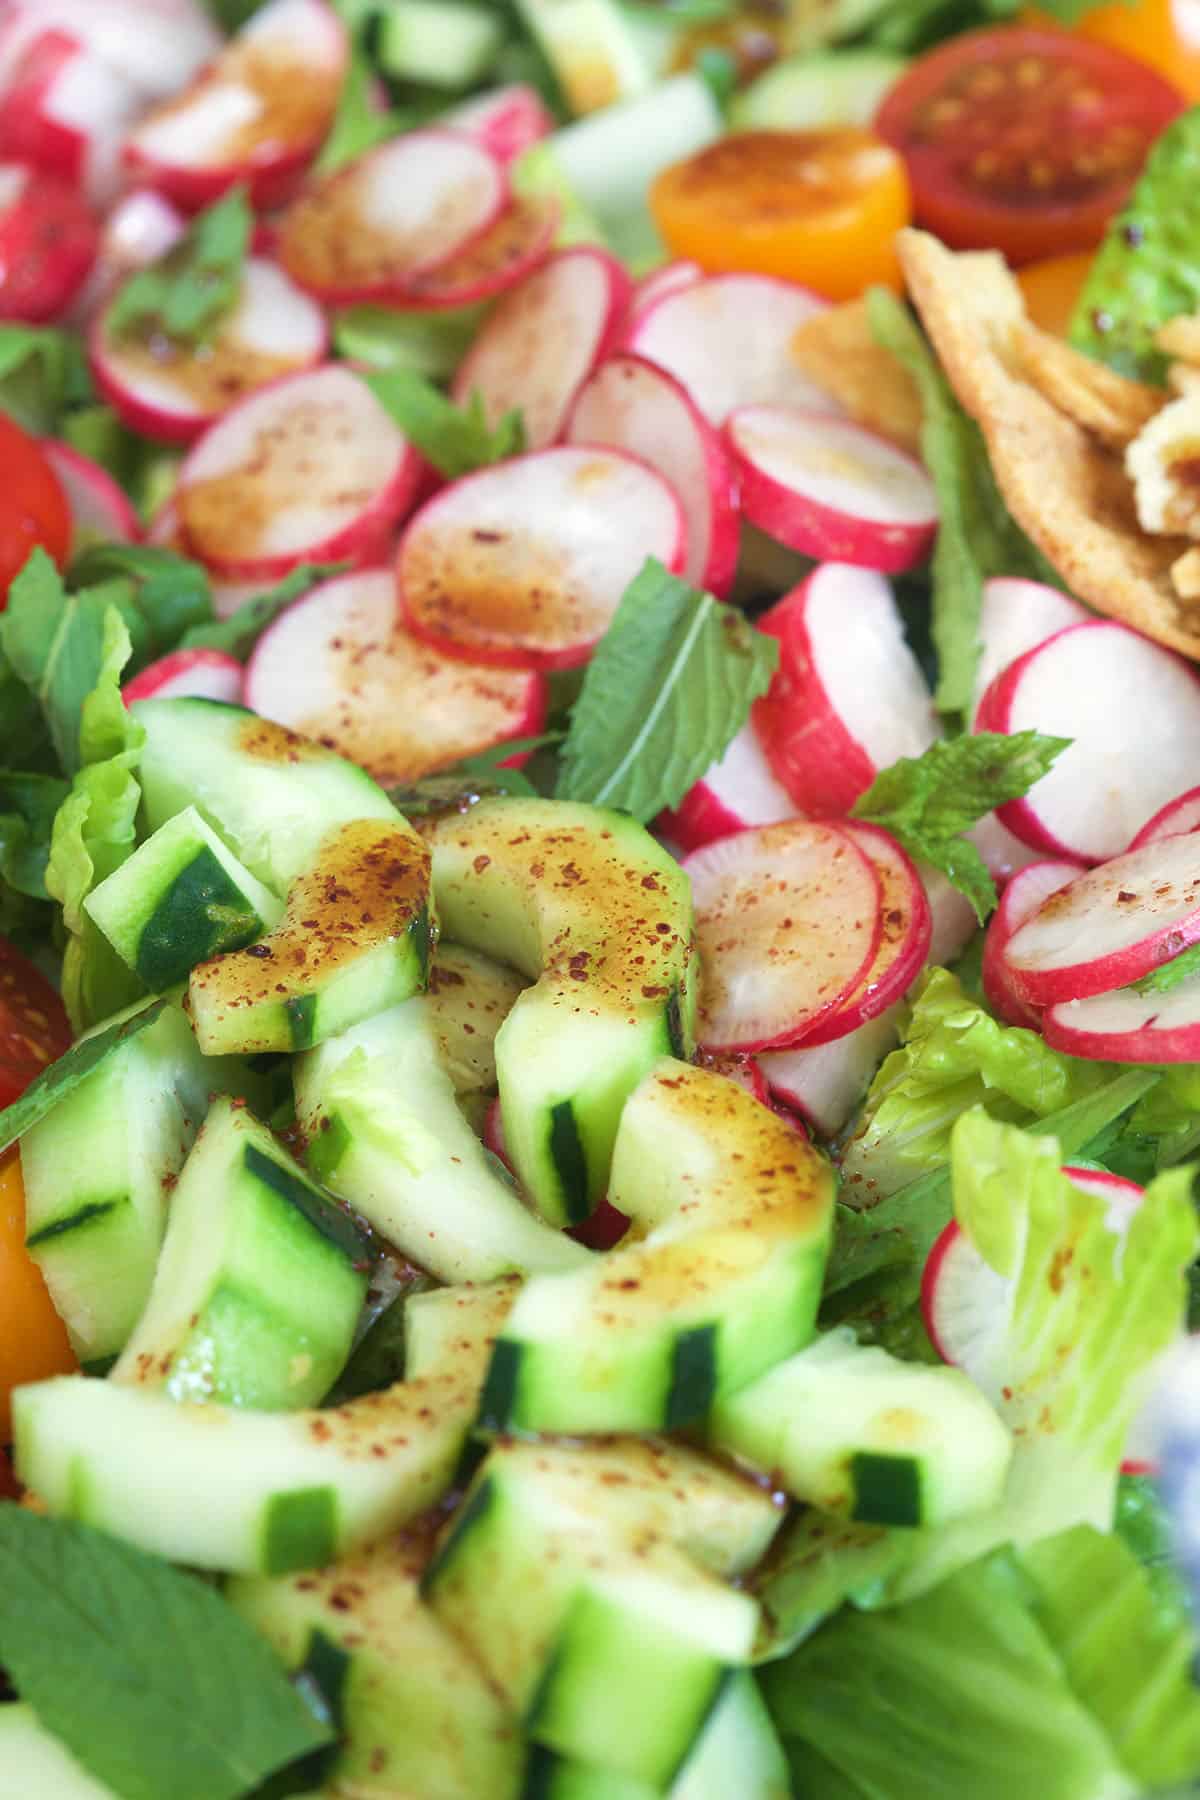 Fattoush salad is topped with dressing.